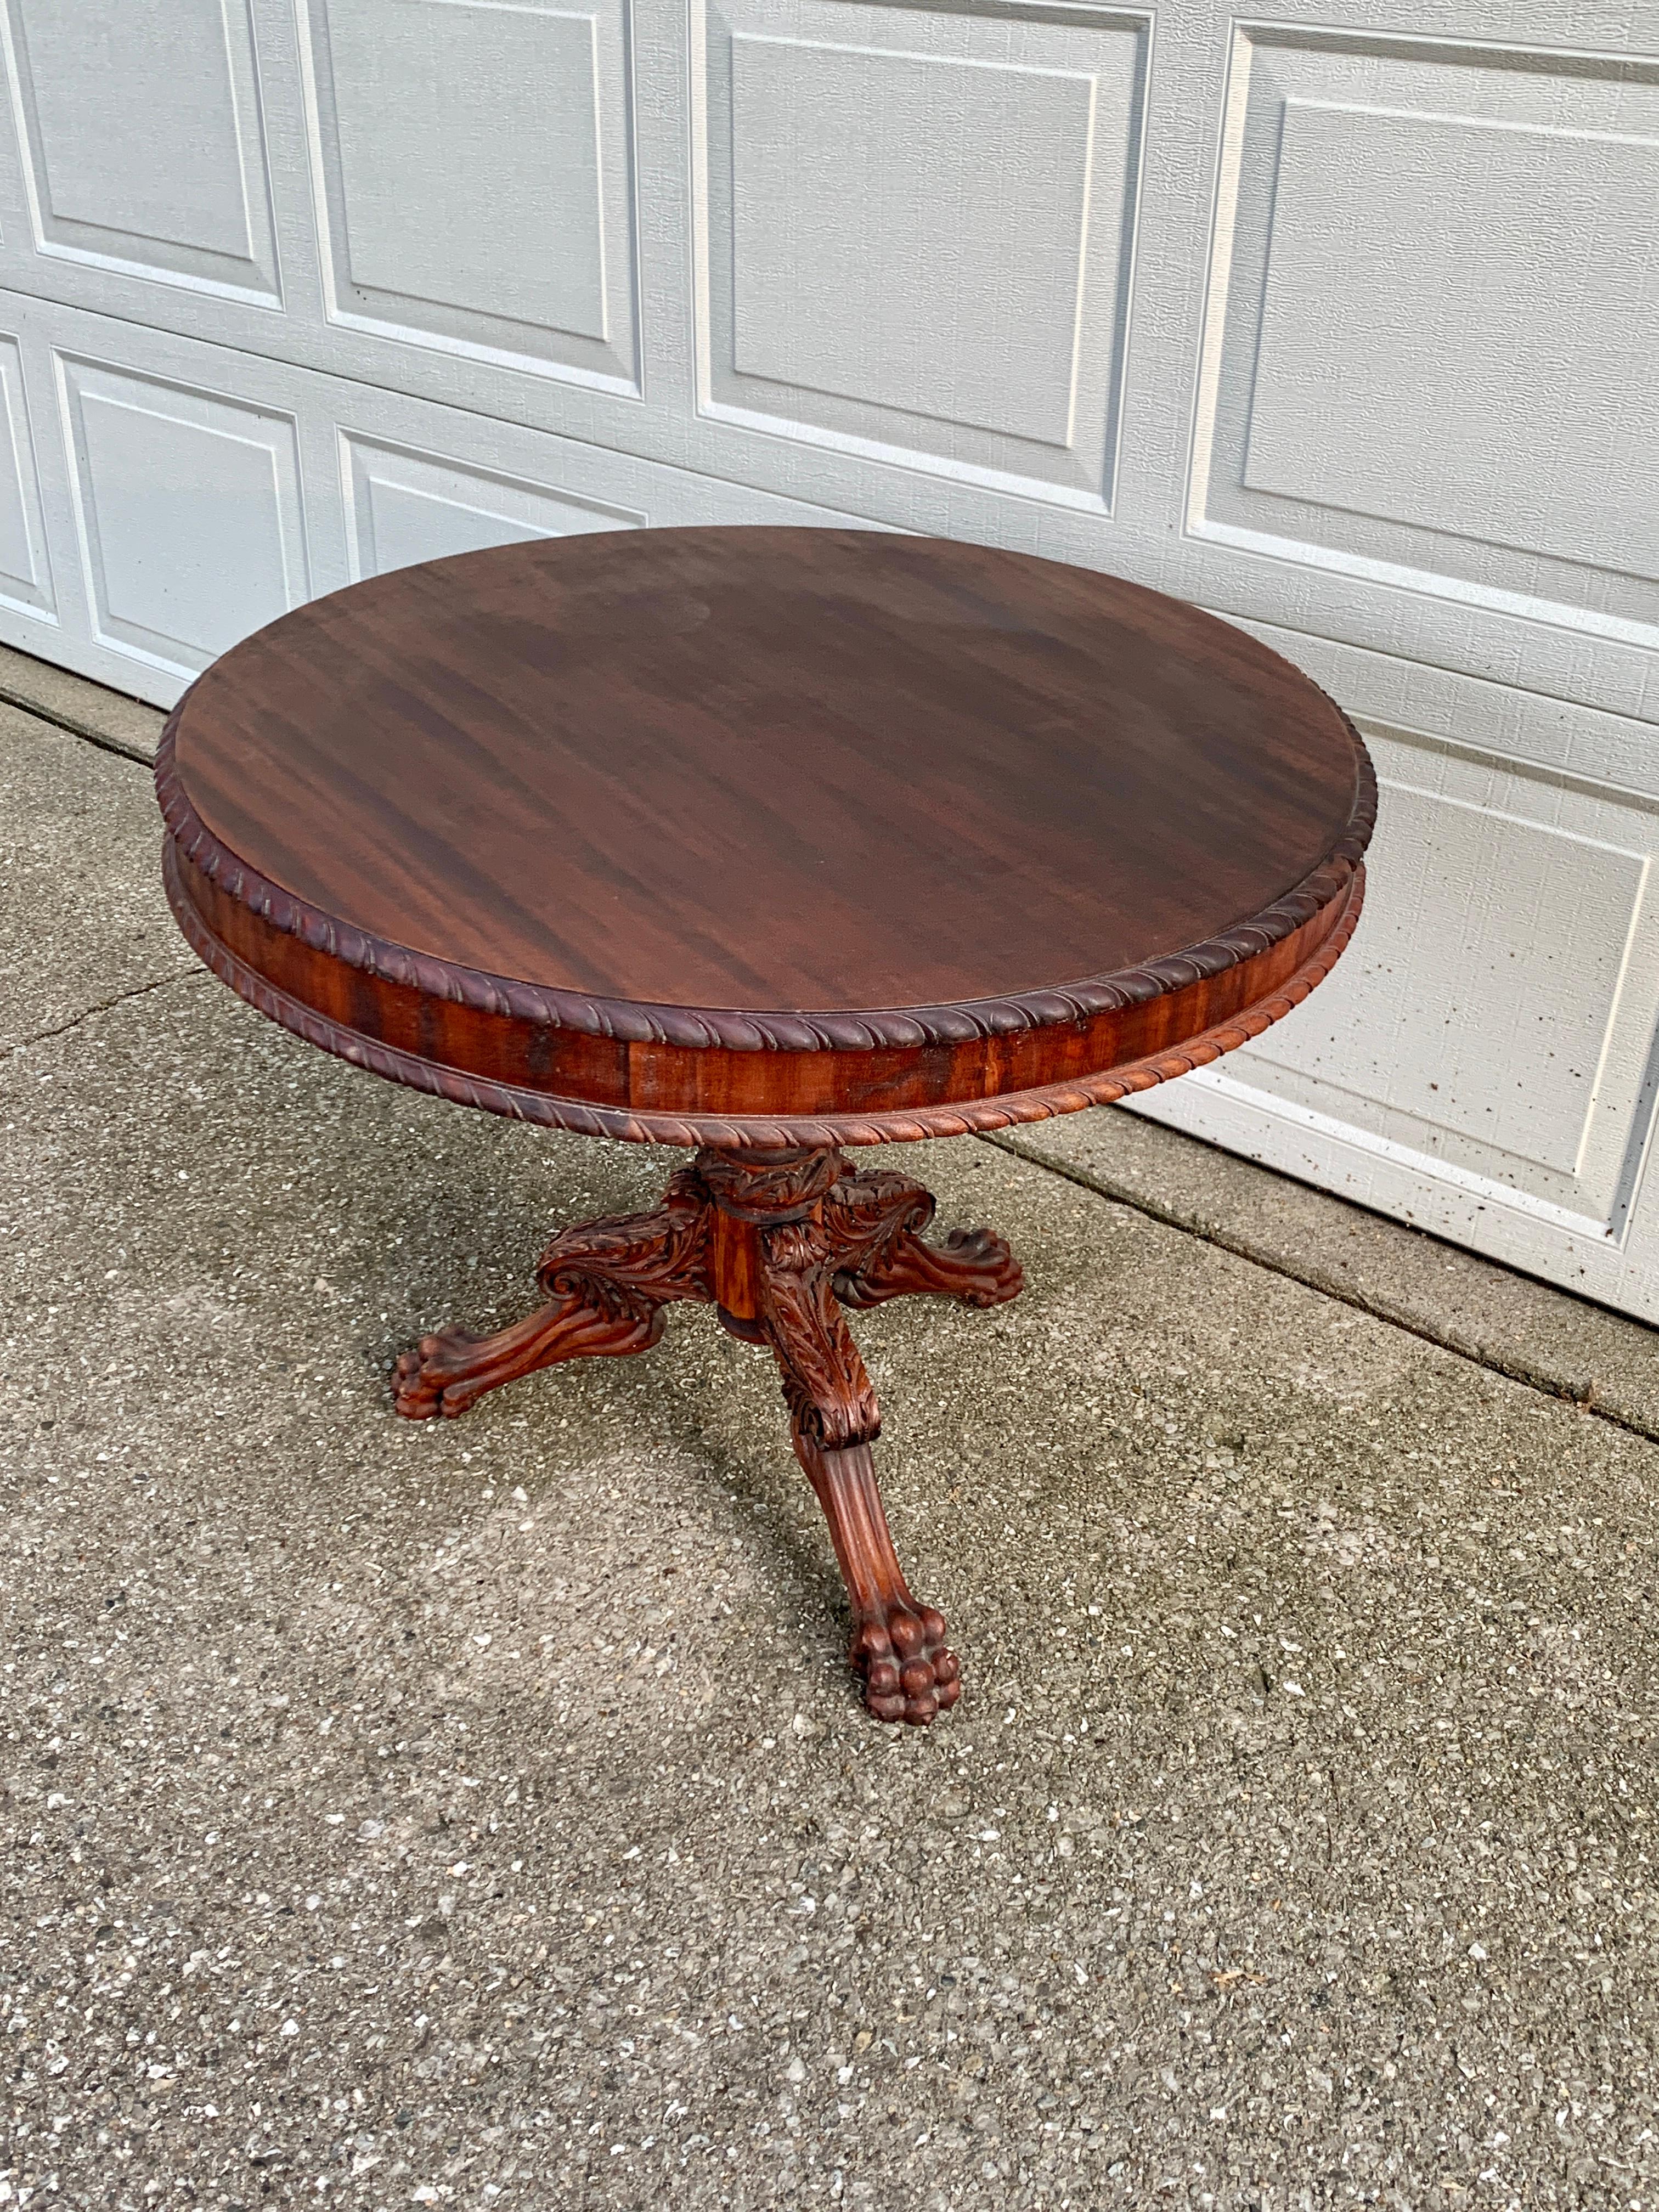 Antique American Empire Mahogany Paw Foot Pedestal Side Table, Late 19th Century In Good Condition For Sale In Elkhart, IN